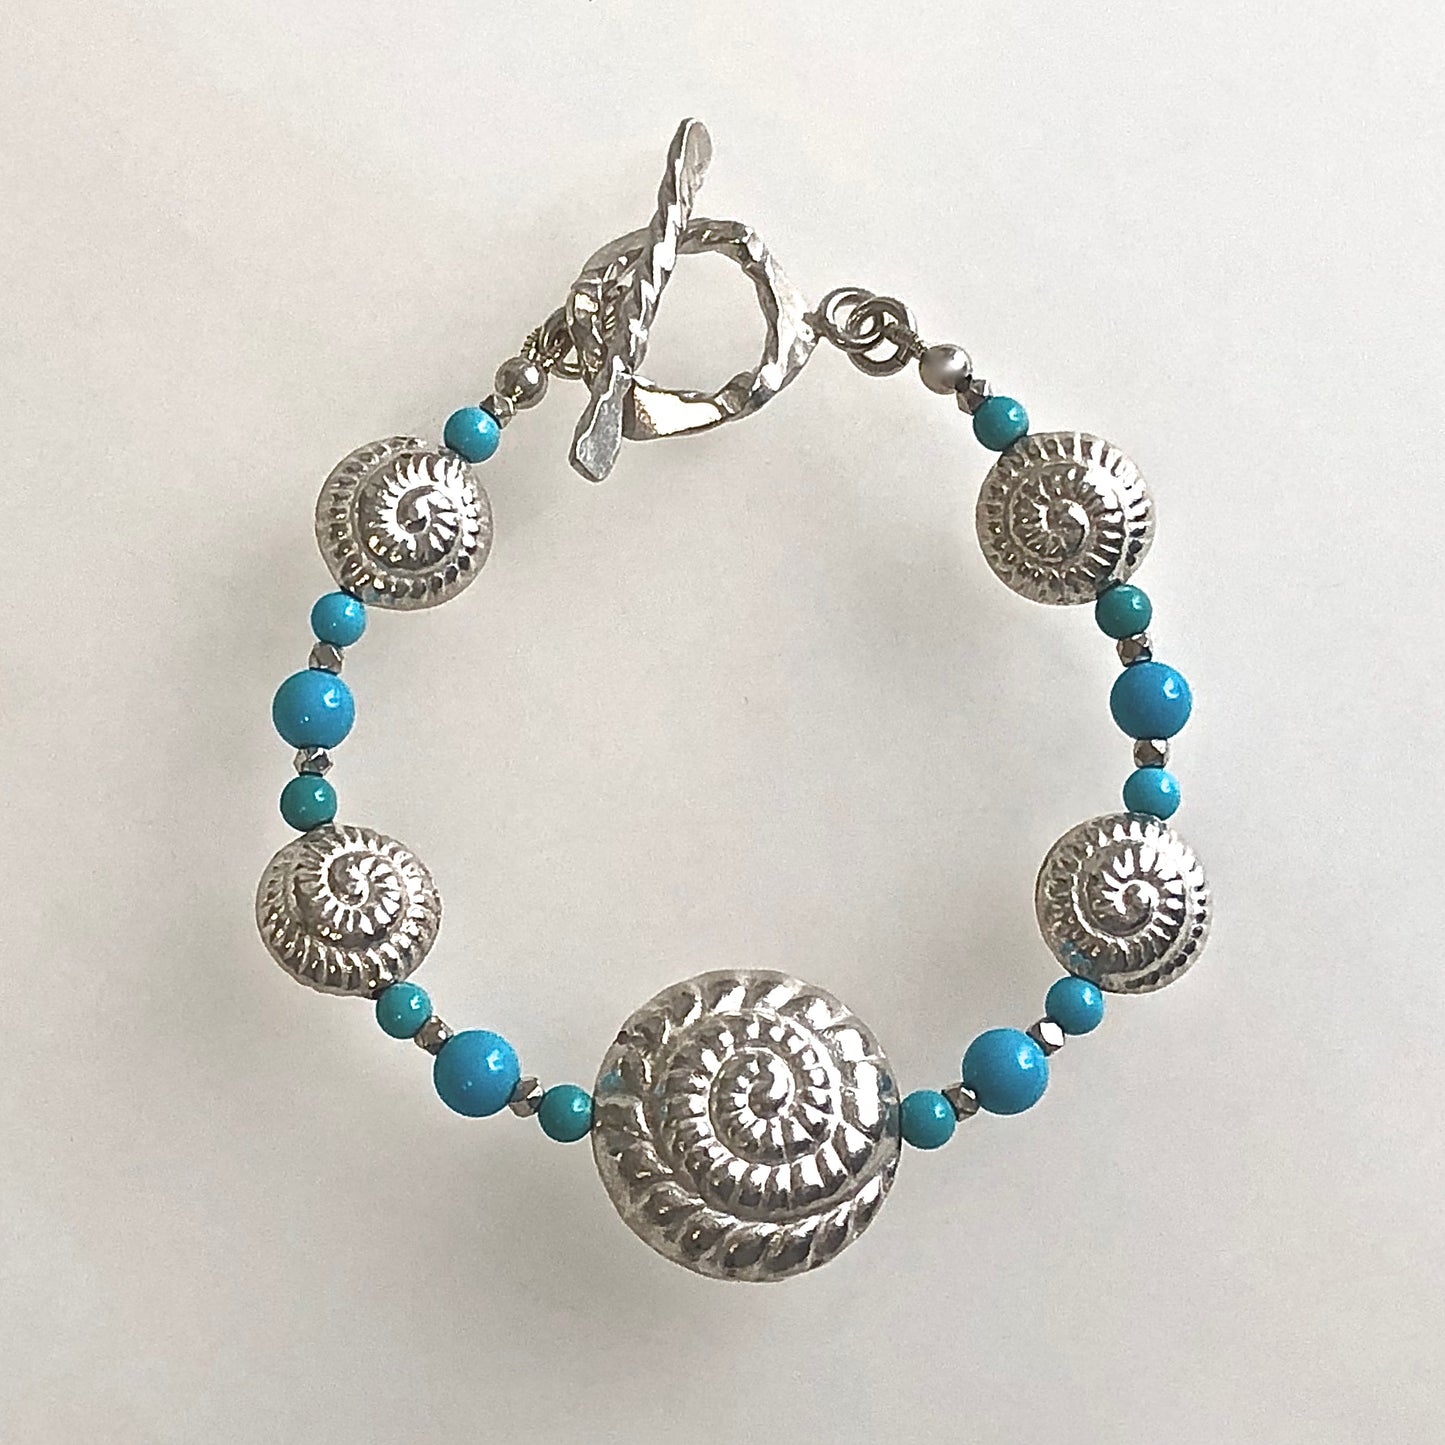 8" one of a kind Nautilus Shell Bracelet in artisan-crafted 999 Fine Silver with Sleeping Beauty Turquoise